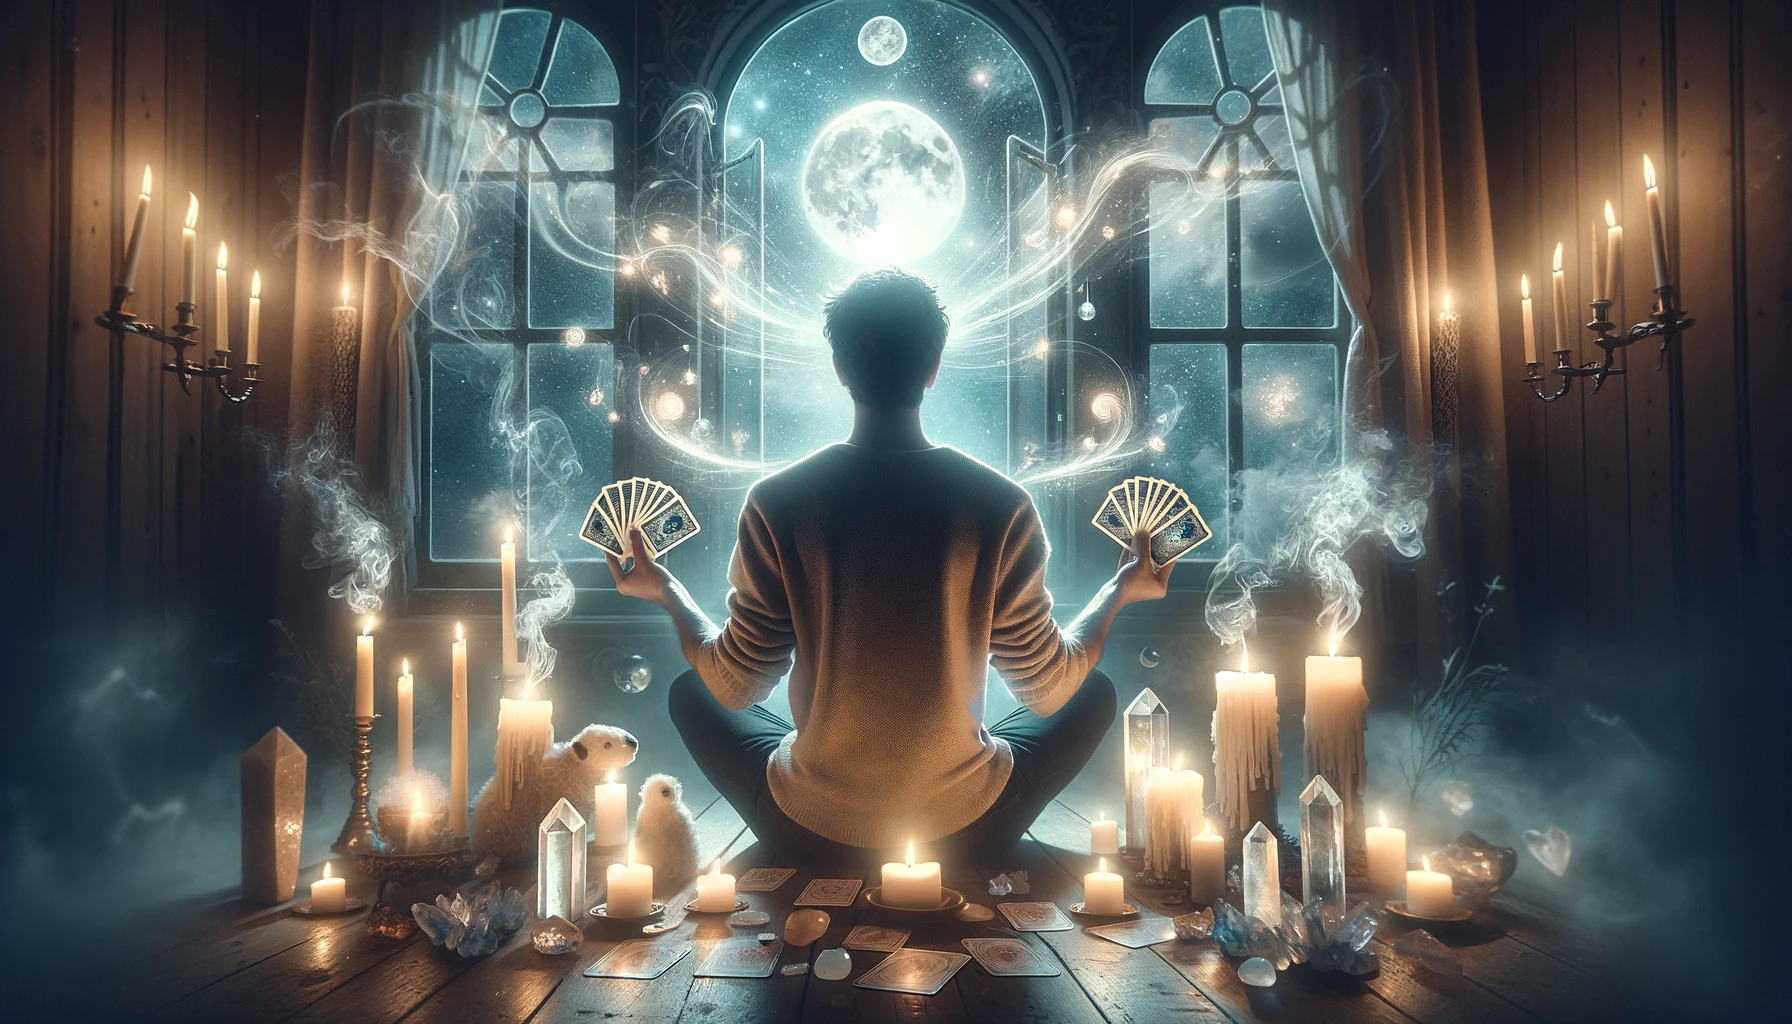 A person sits in a meditative pose holding tarot cards with reverence and focus. They are surrounded by an array of candles casting a soft flickerin